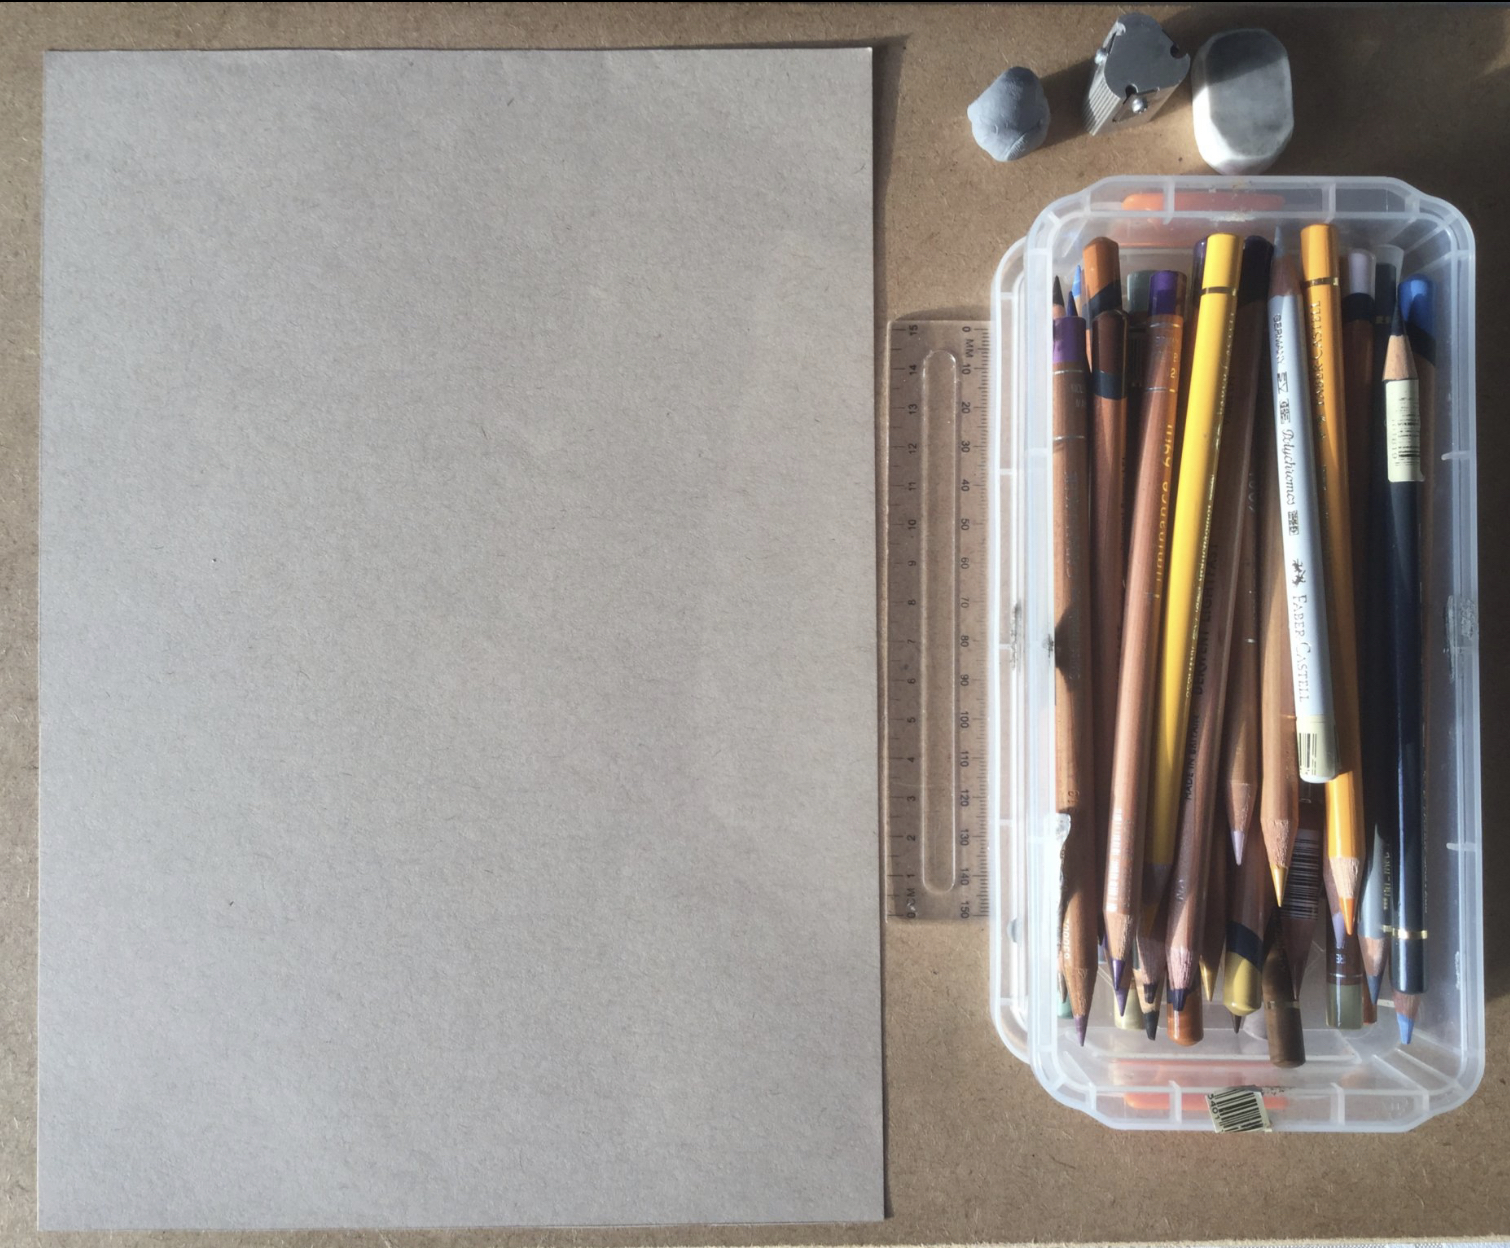 Artistic Blog - learn how to draw with colored pencils: How to